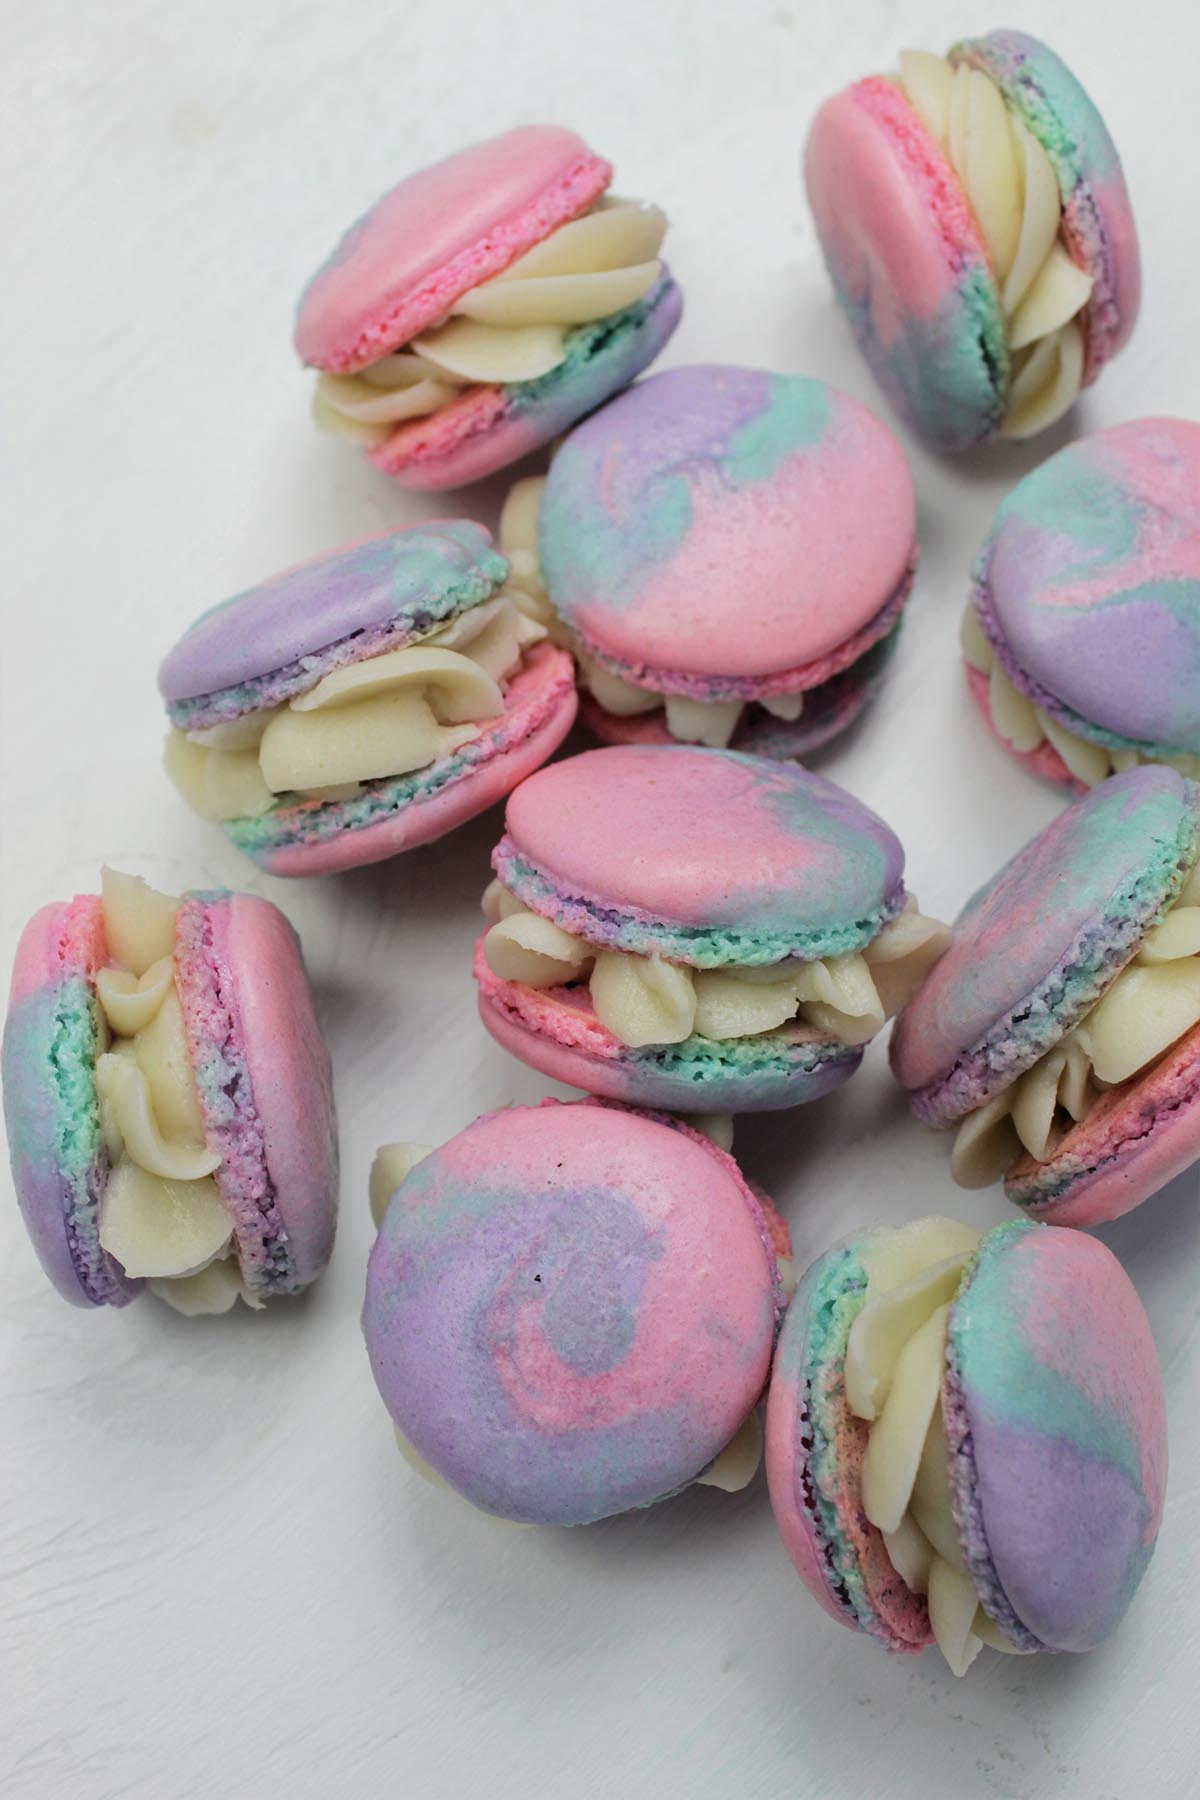 pile of macarons with tie dye shells.